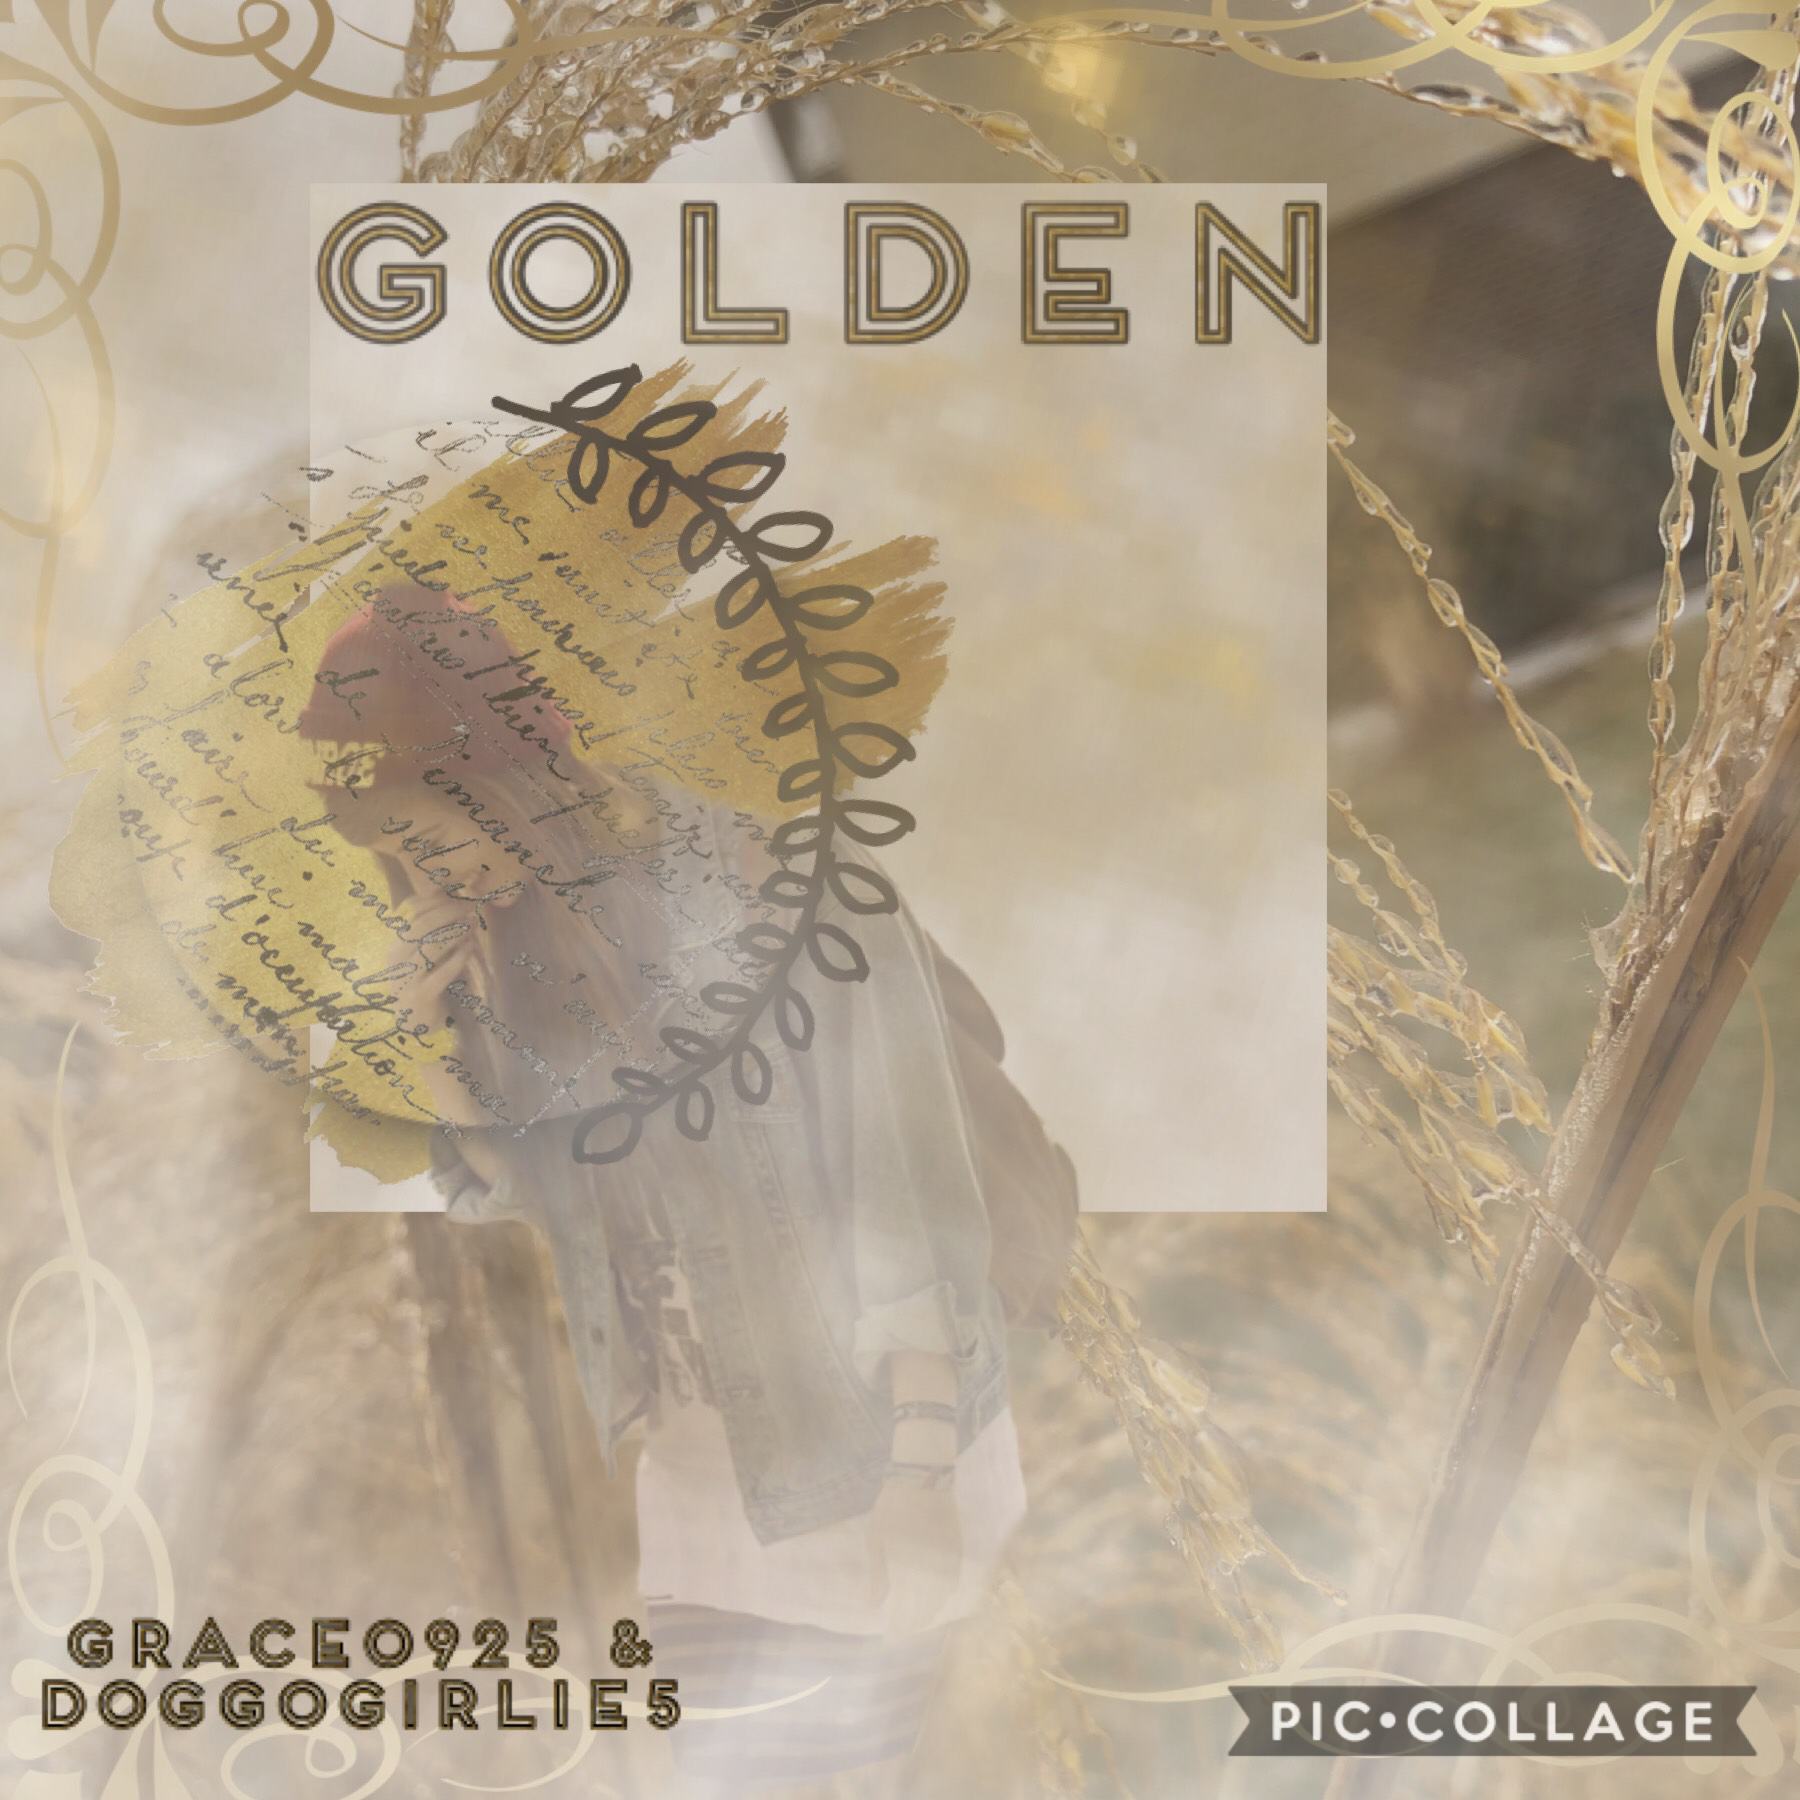 ⚜️⚜️🌾🌞🌾⚜️⚜️
Collab with my fav, DOGGOGIRLIE5!!
-Grace0925